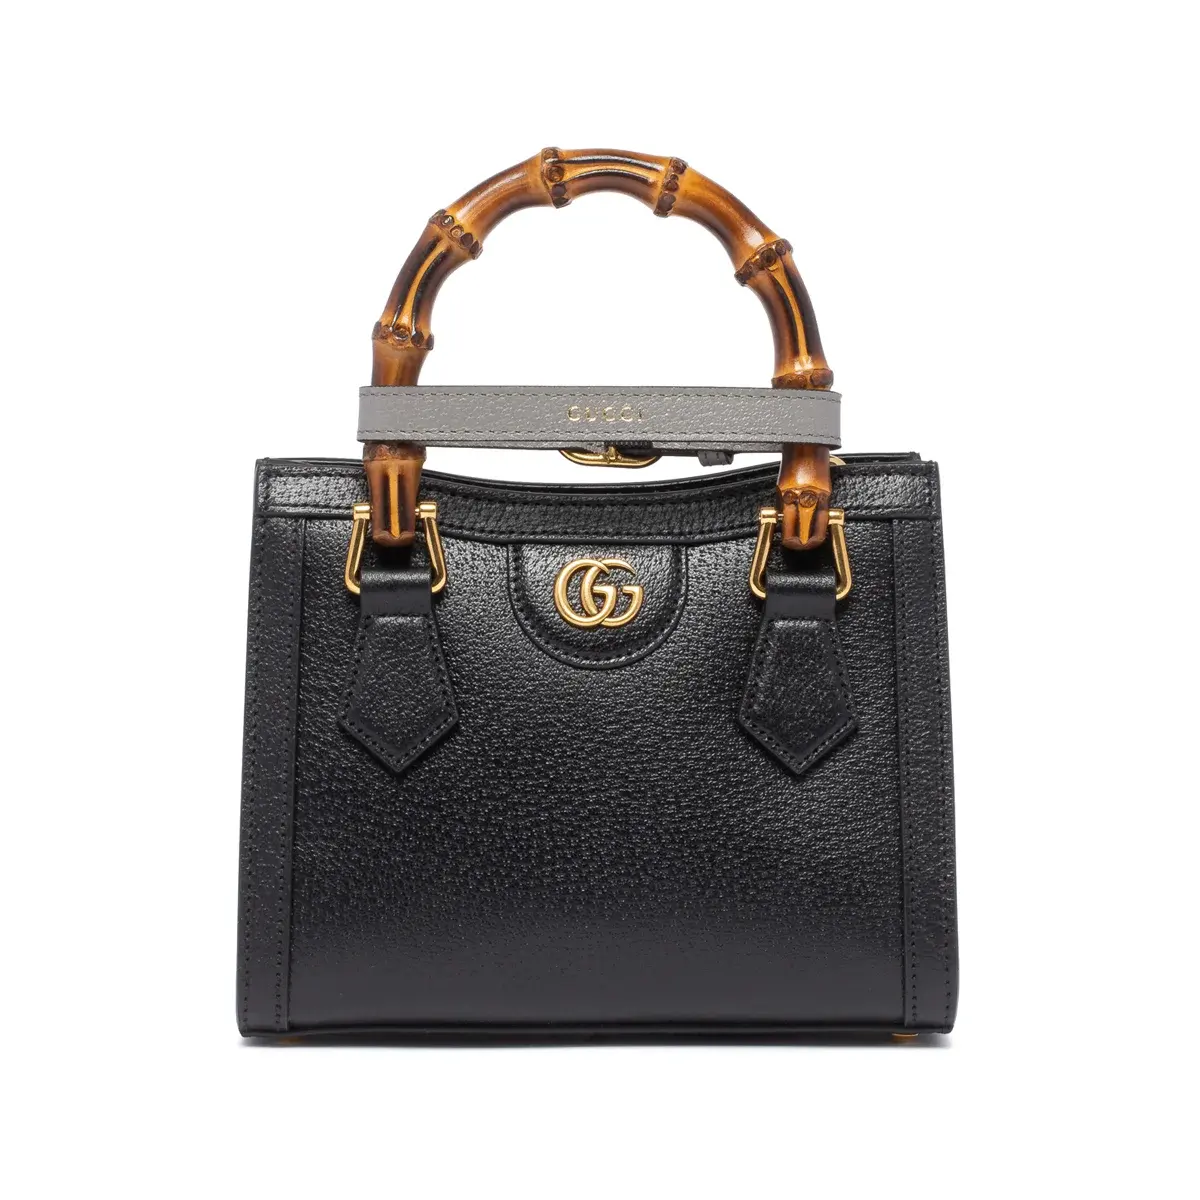 Cettire AU: Up to 60% OFF on Gucci Bags & Clothing